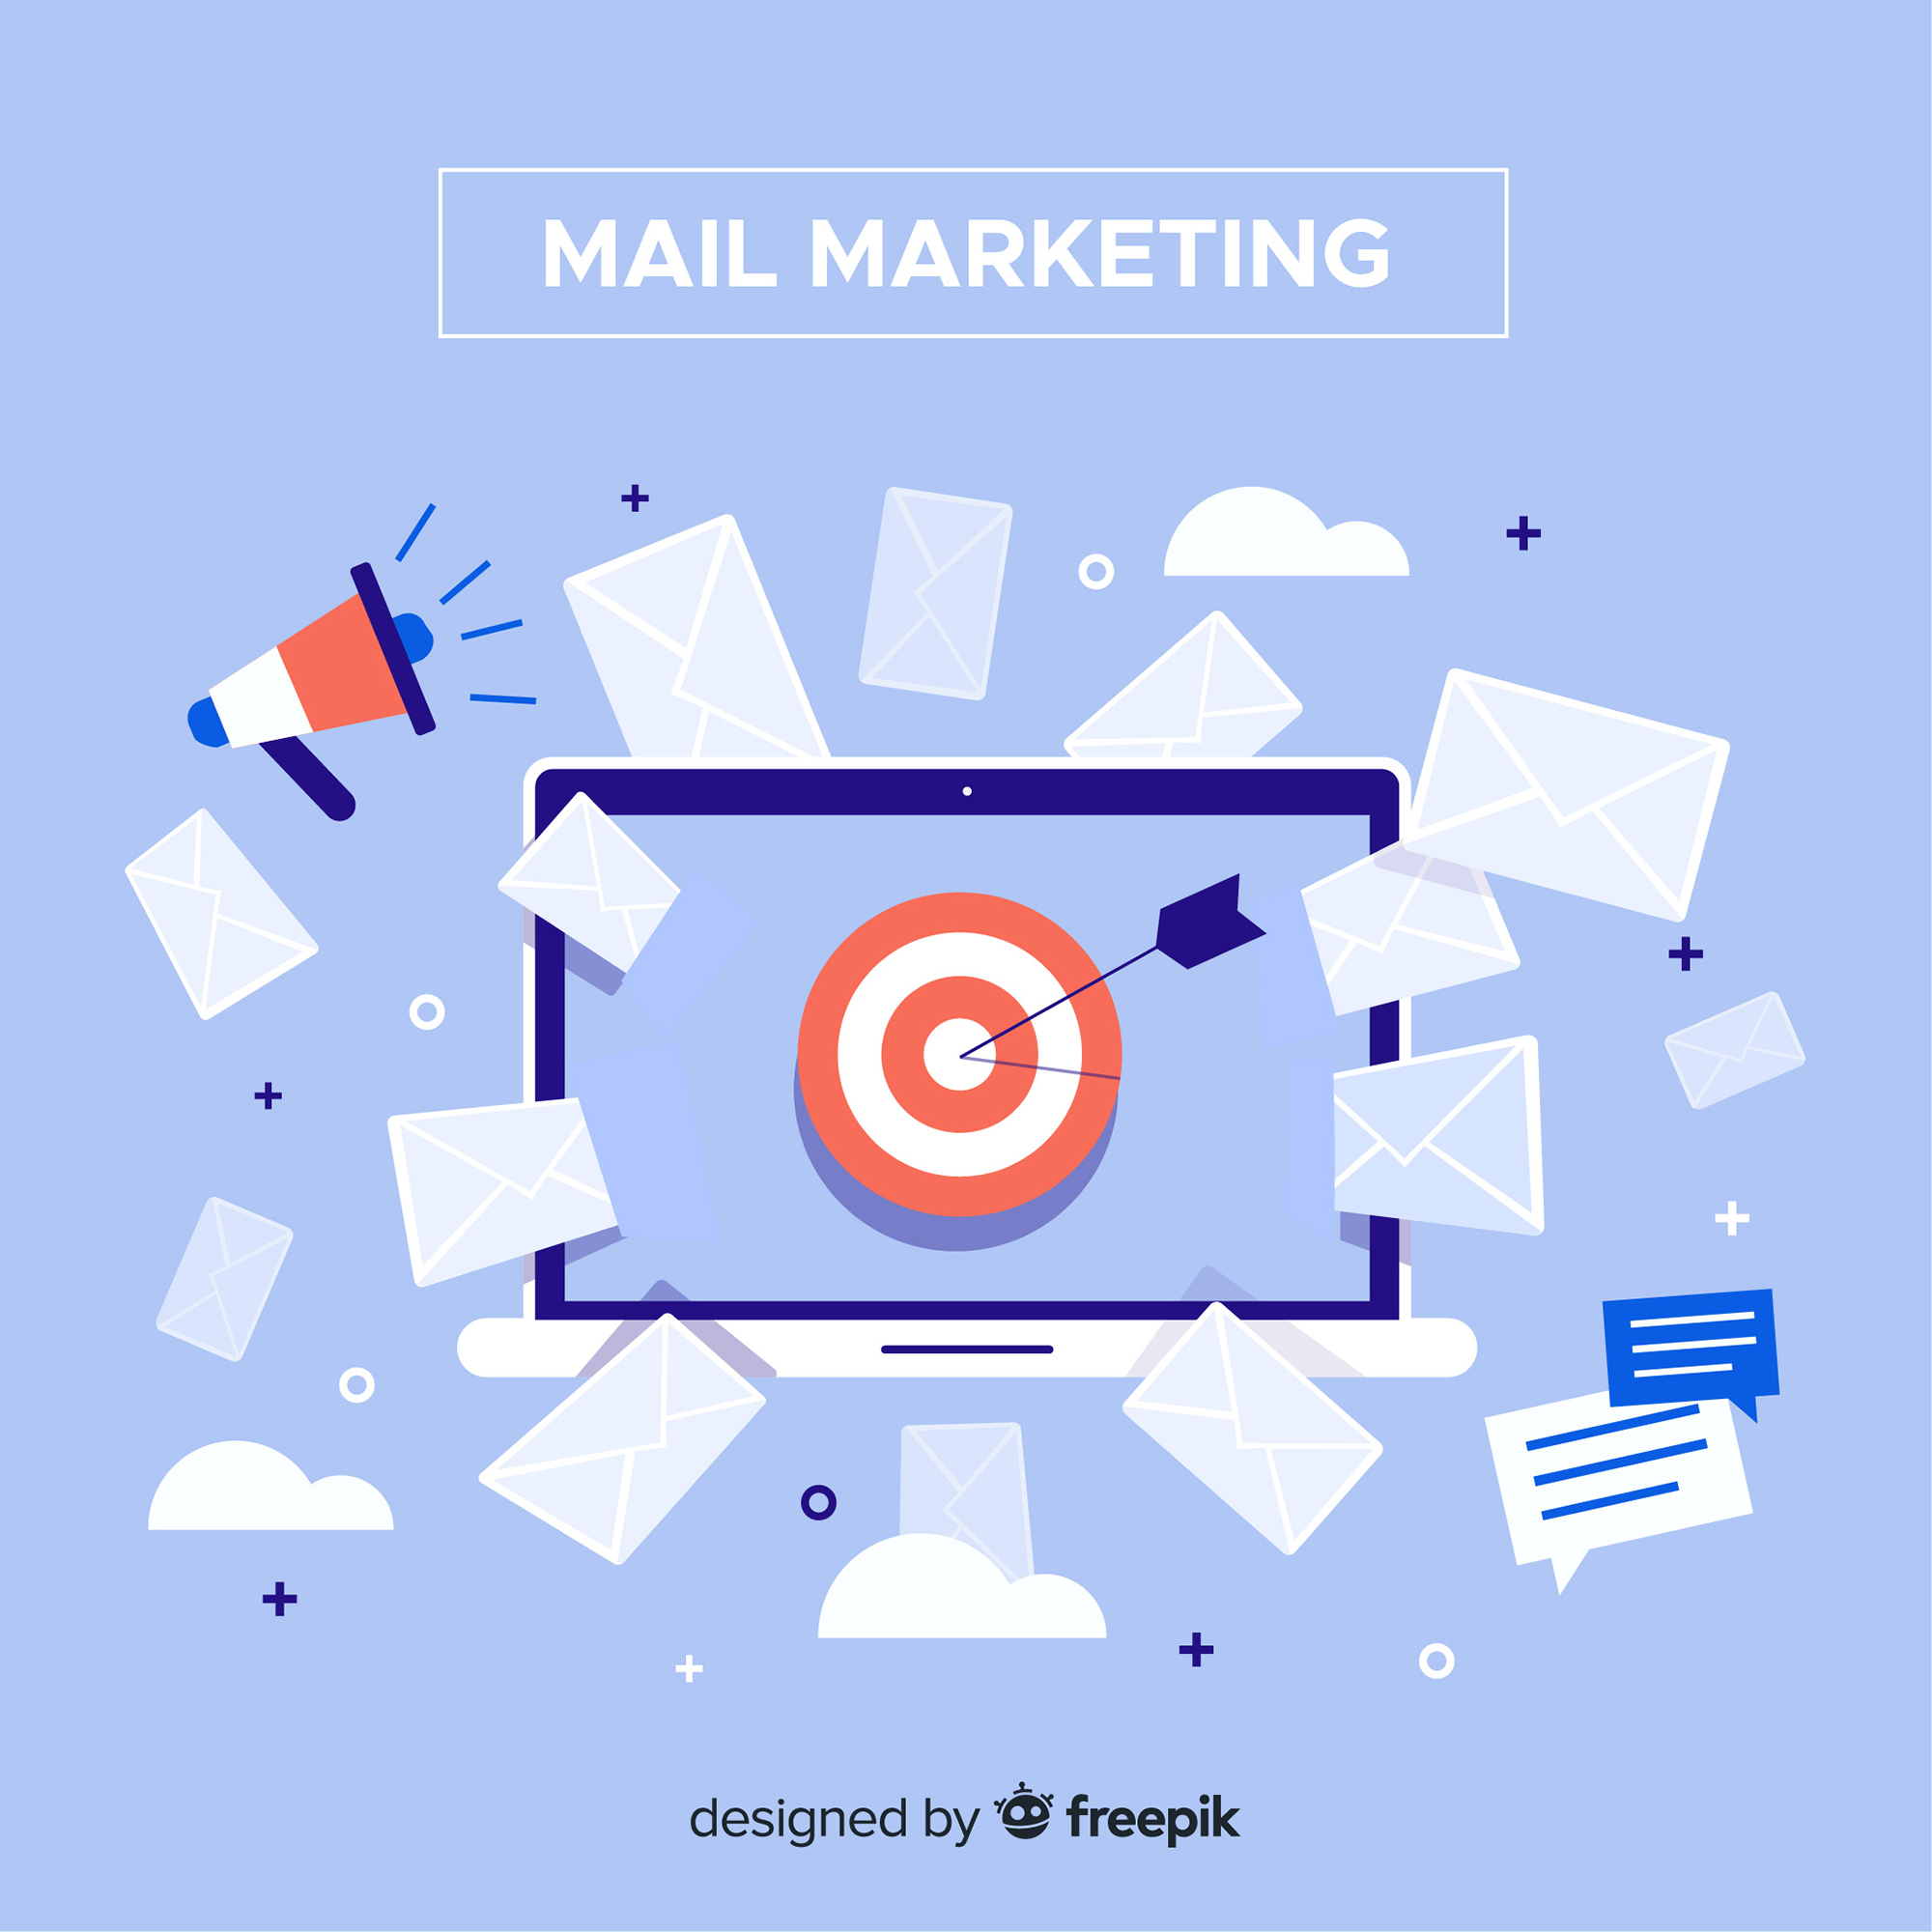 6 E-mail Template Builders to Improve Your E-mail Marketing